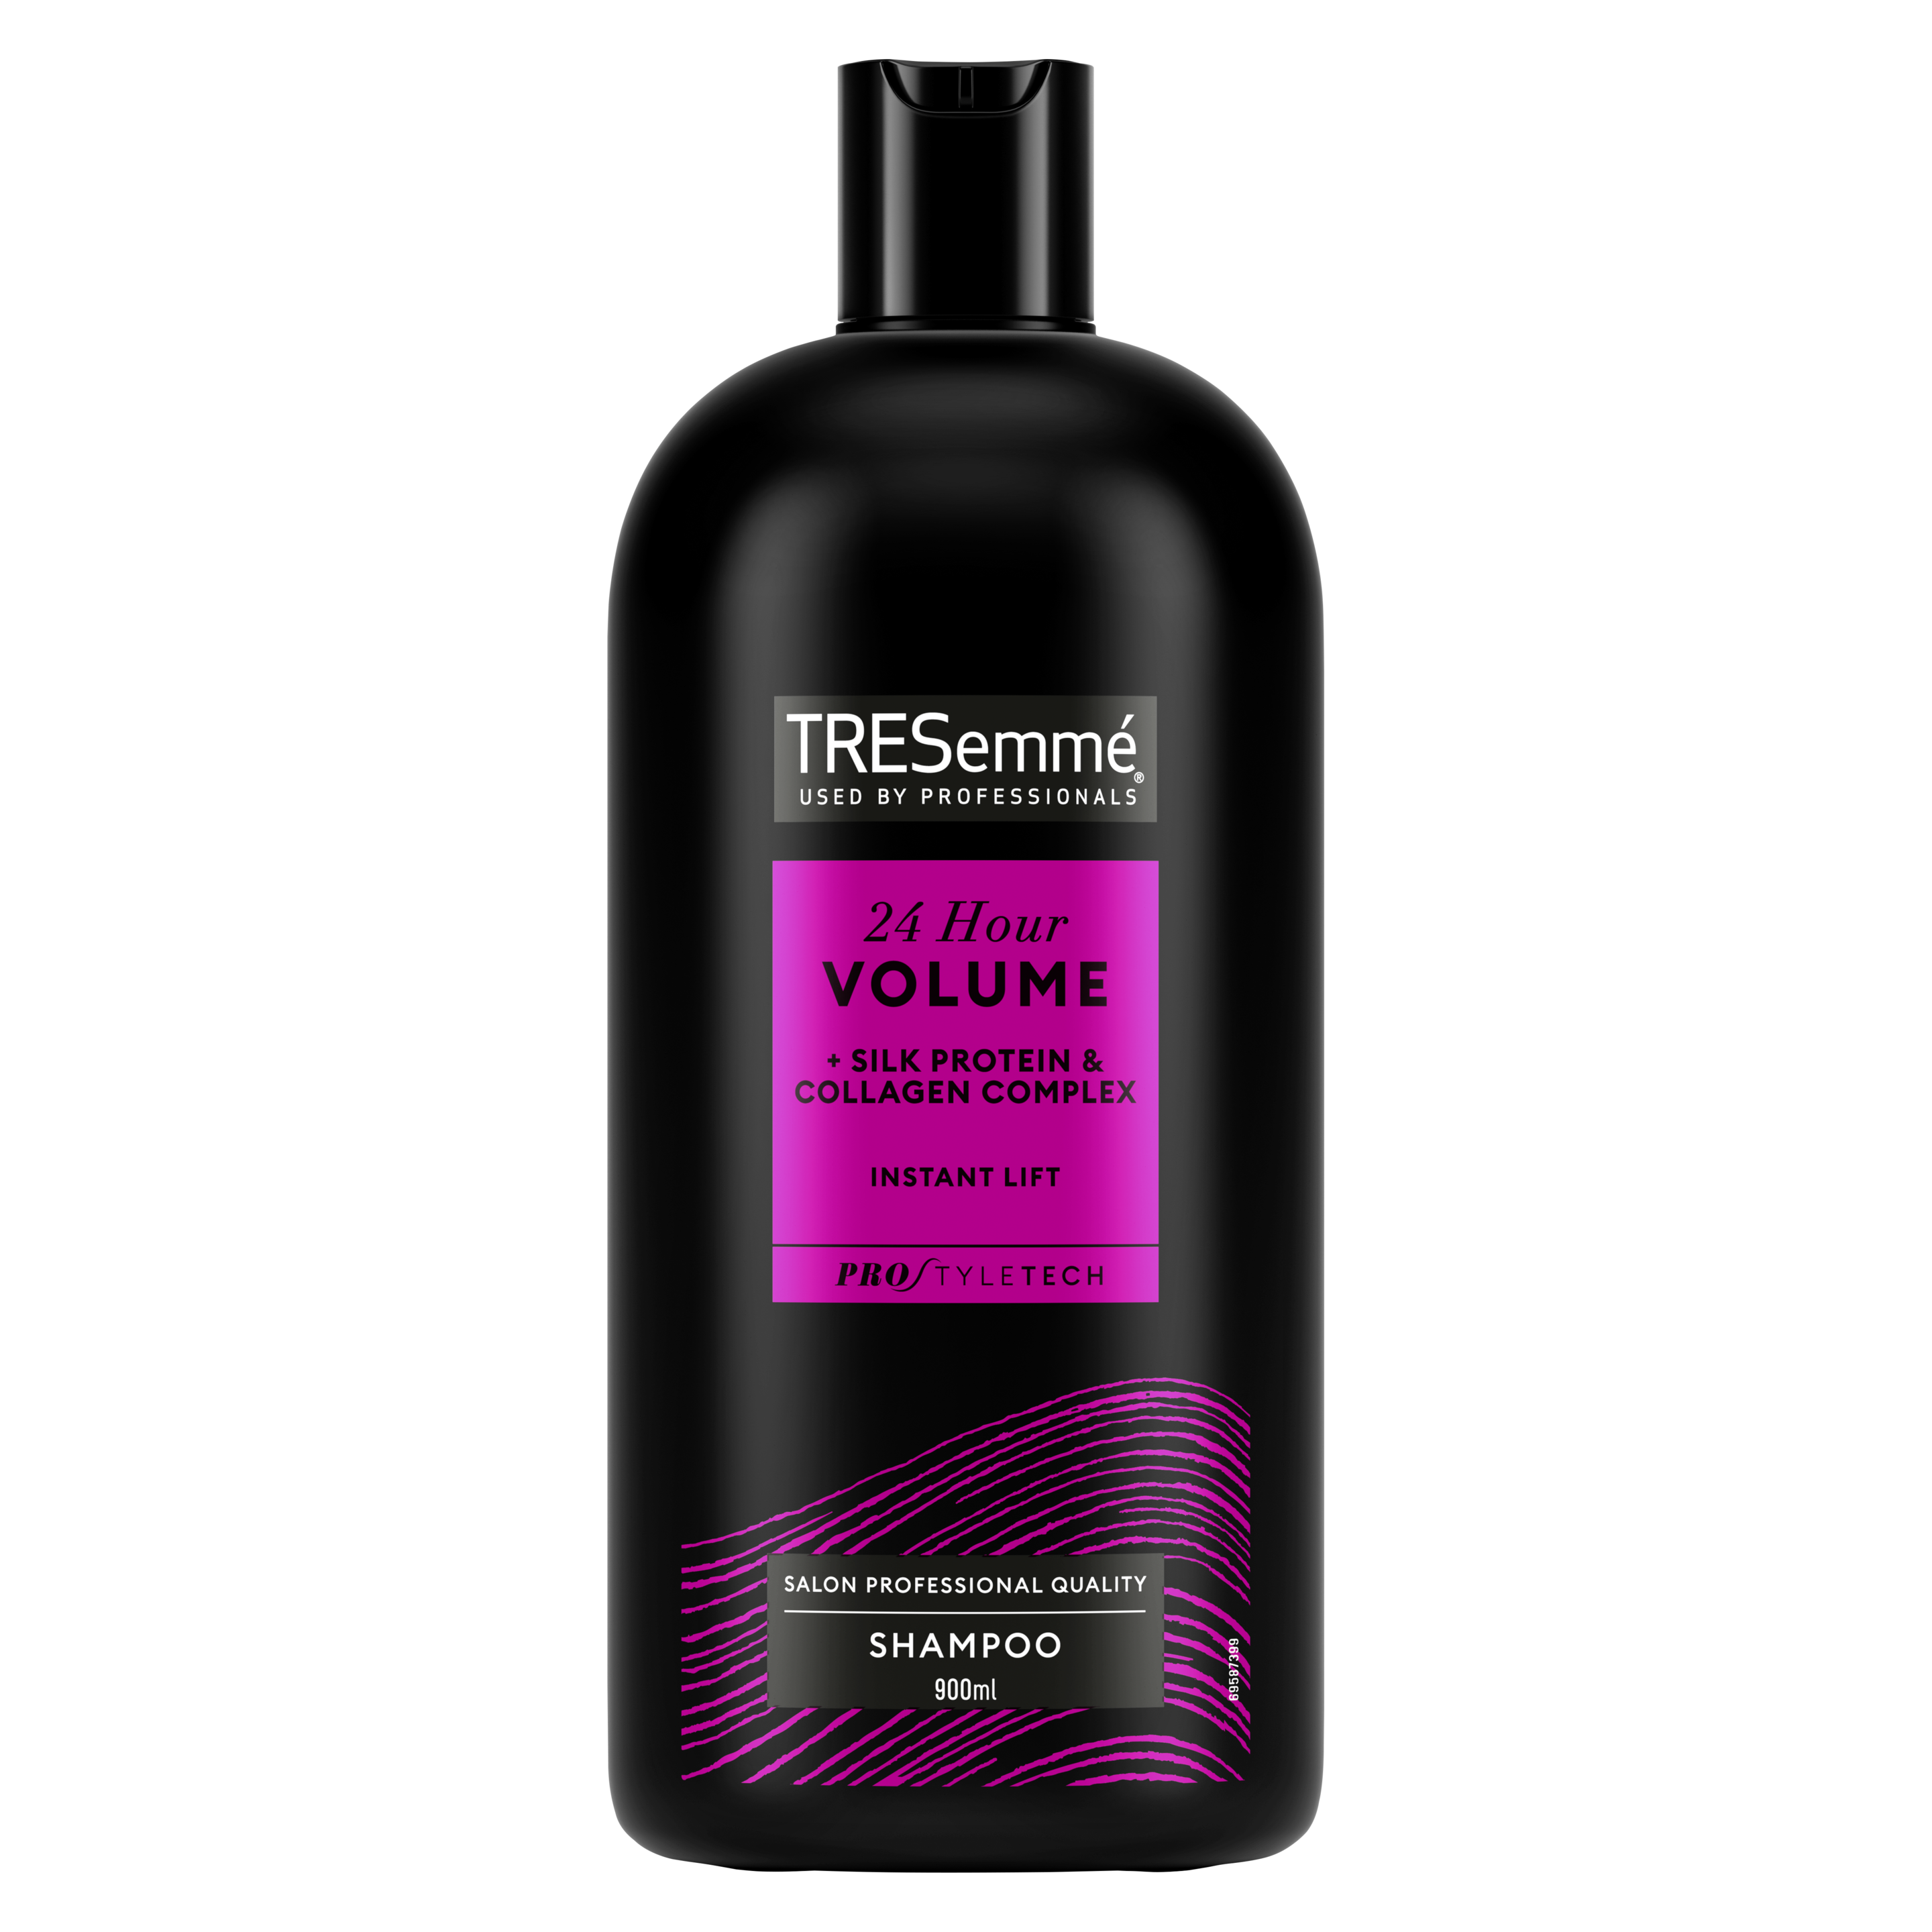 A 900ml bottle of TRESemmé 24 Hour Body &Volume Shampoo front of pack image